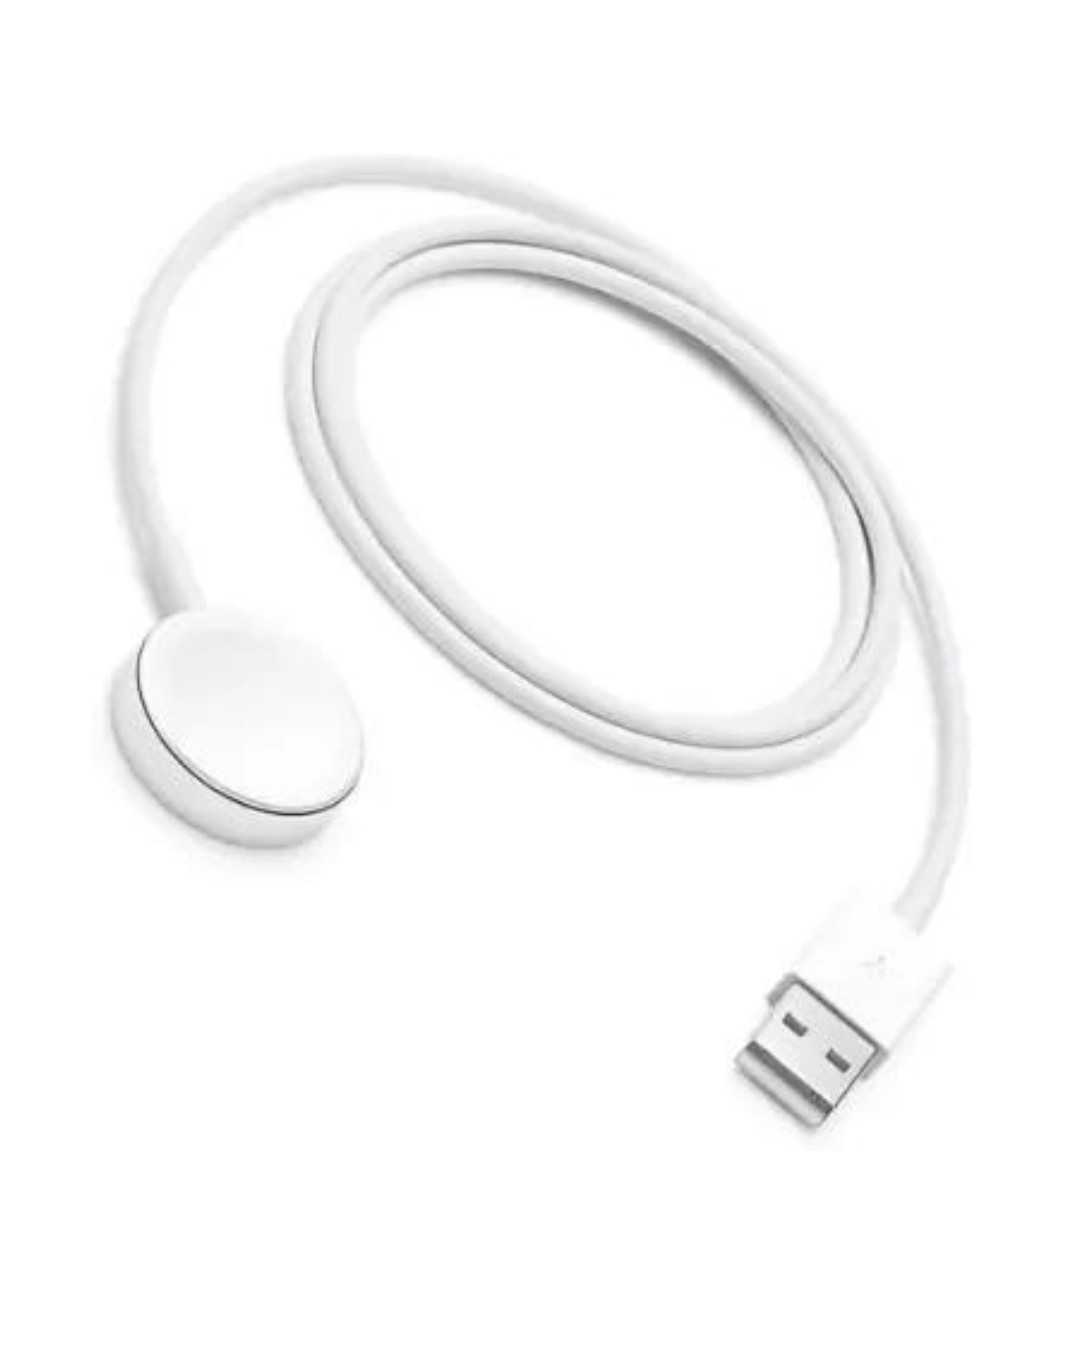  Magnetic USB-C Charging Cable for Watch Charging Pad